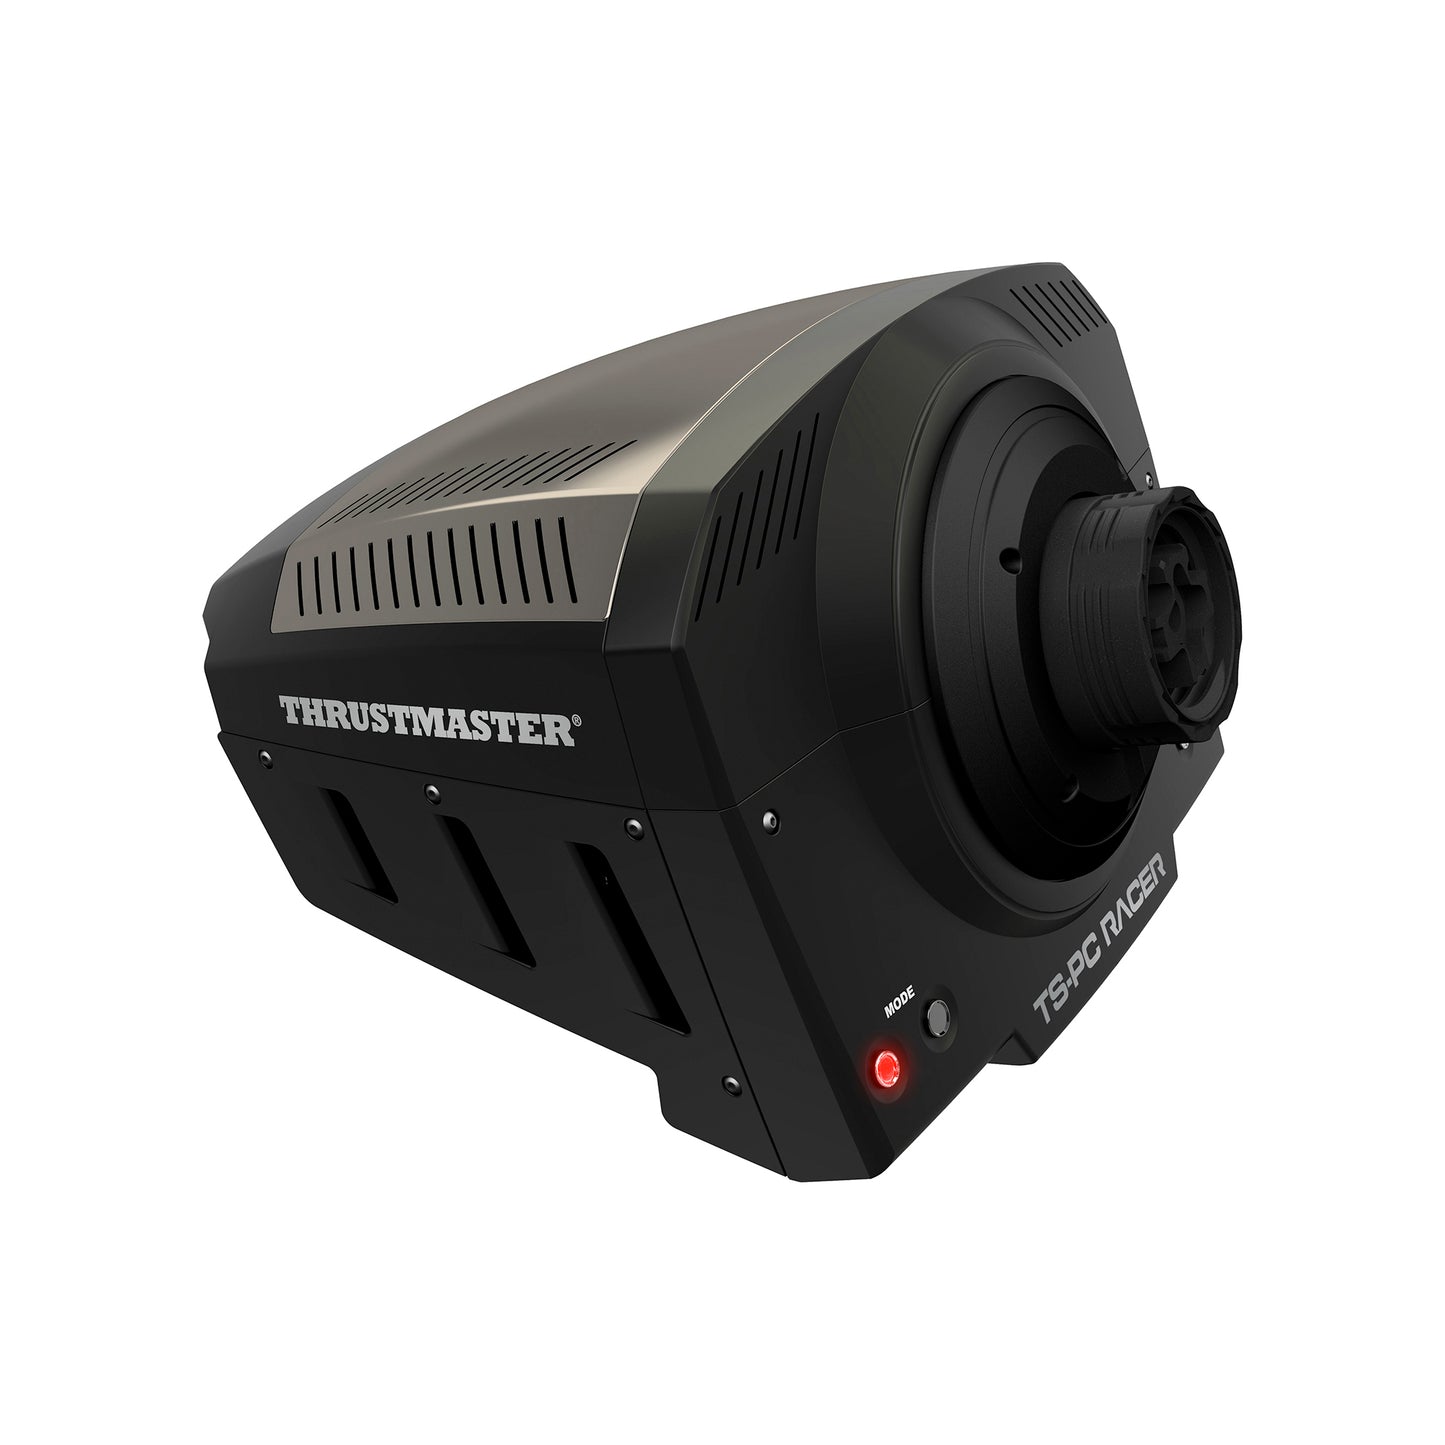 THRUSTMASTER TS-PC RACER 488 EDITION